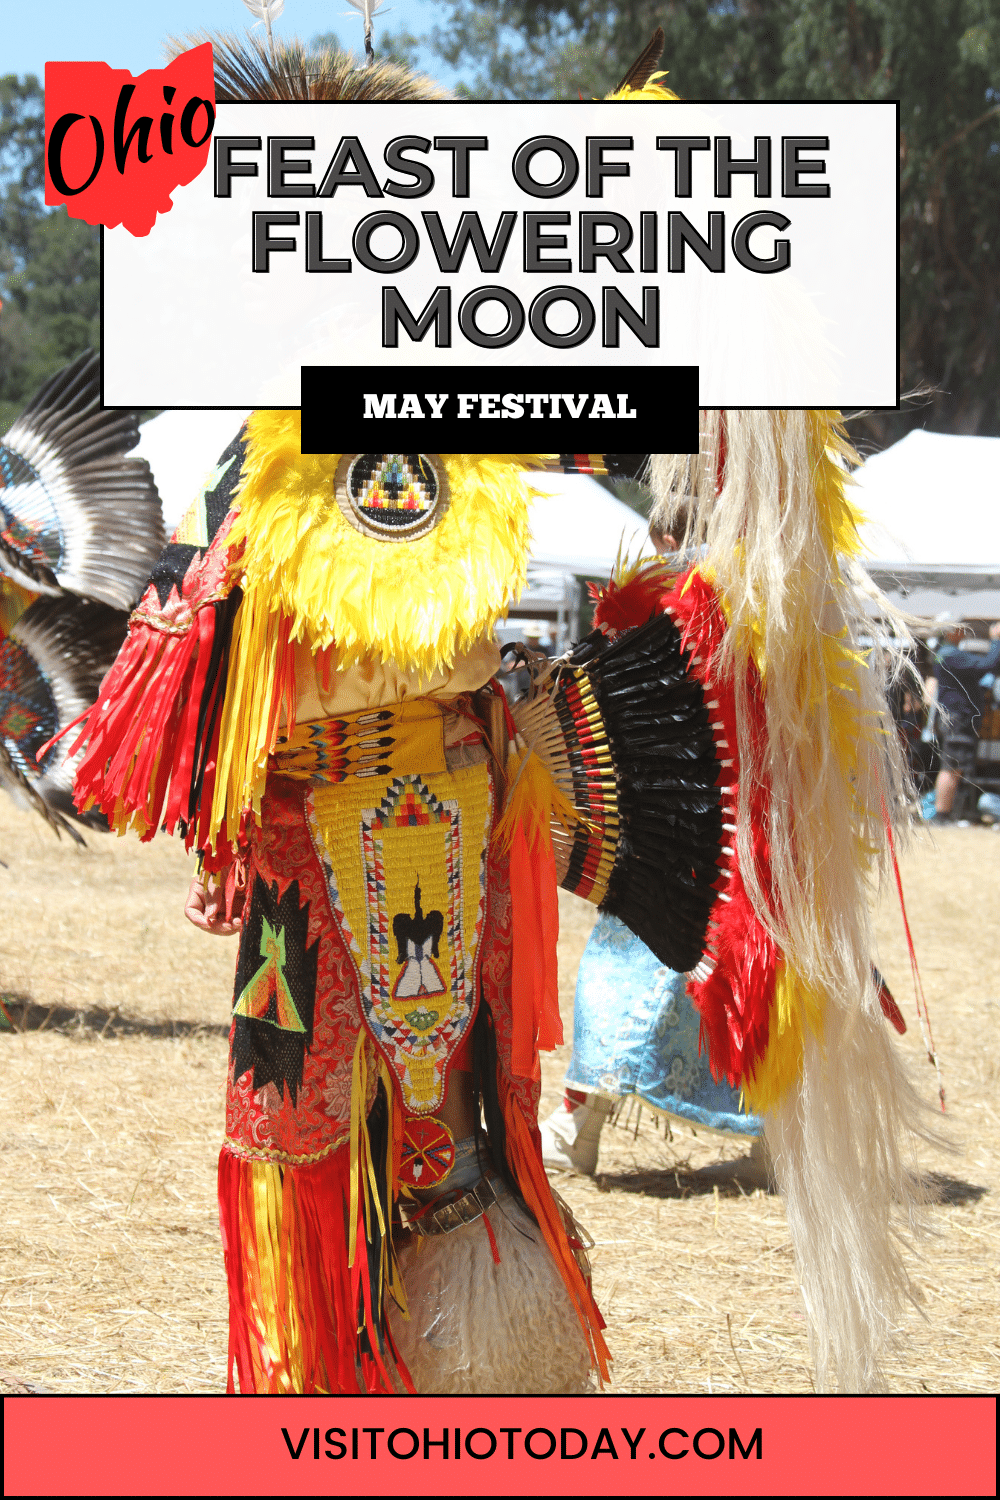 Feast of the Flowering Moon is an annual festival celebrating Native American culture that takes place in the historic area of downtown Chillicothe in late May on Memorial Day weekend.